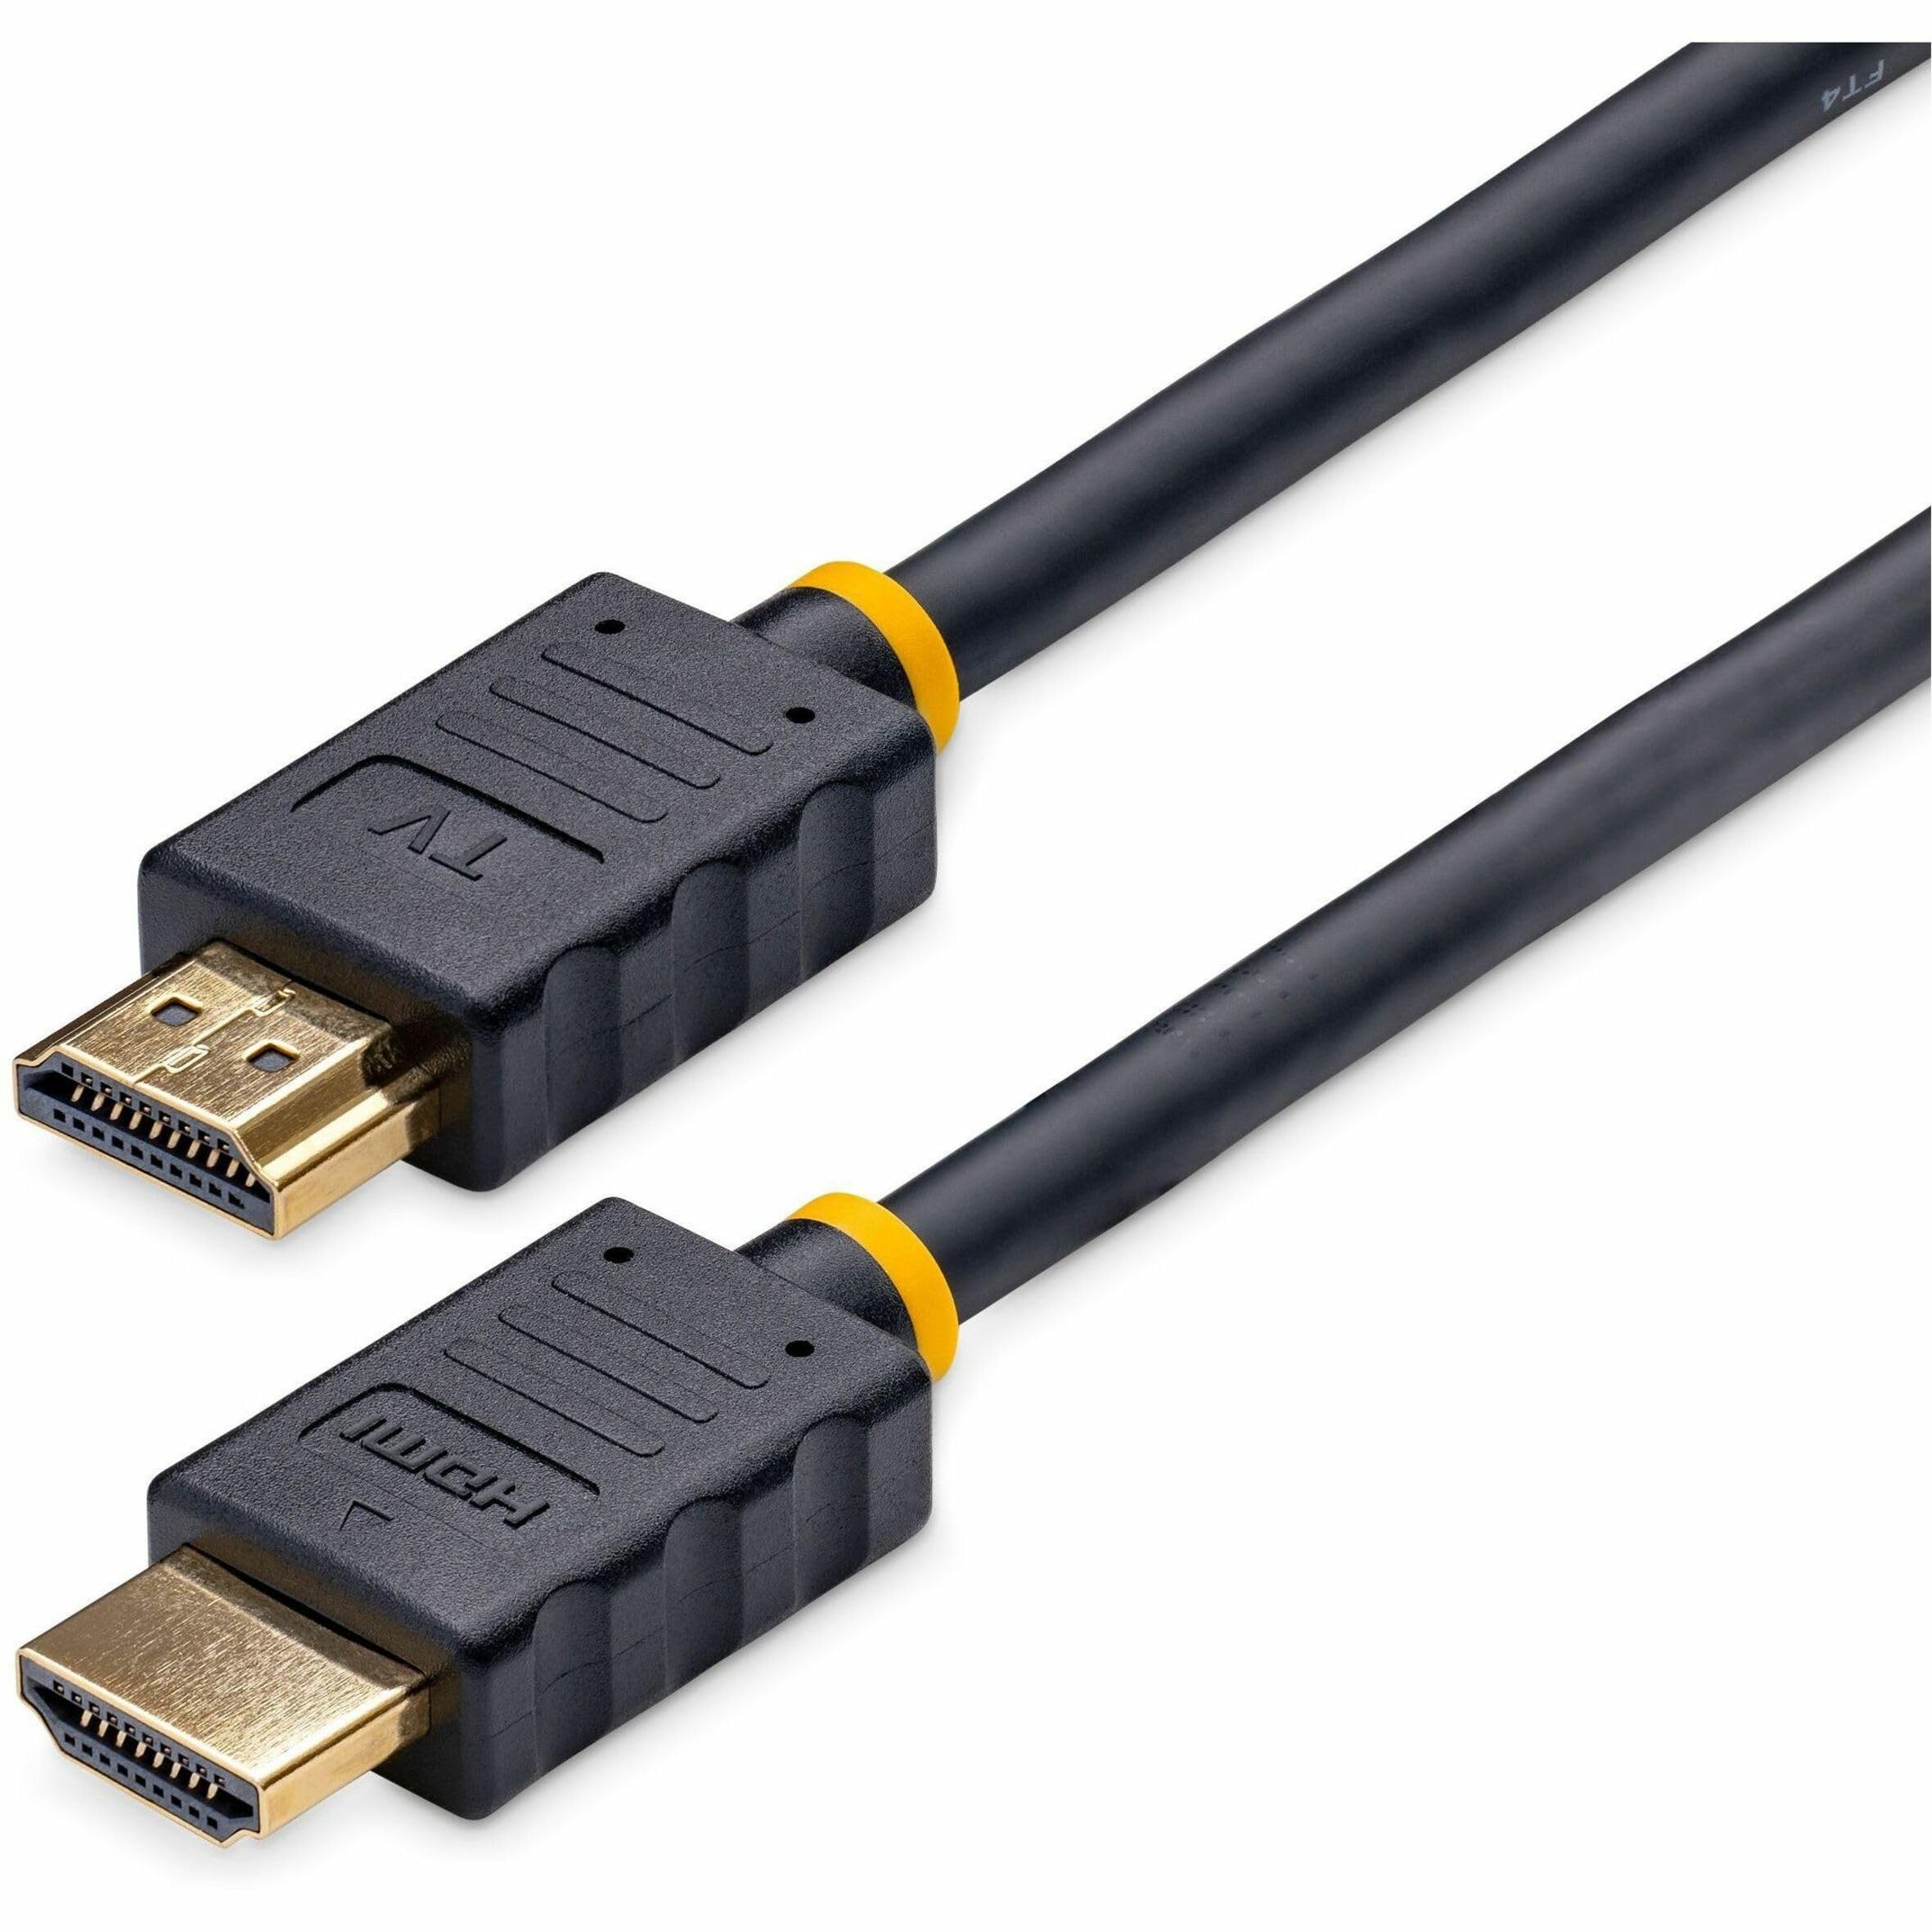 HDMI cable with a question mark.